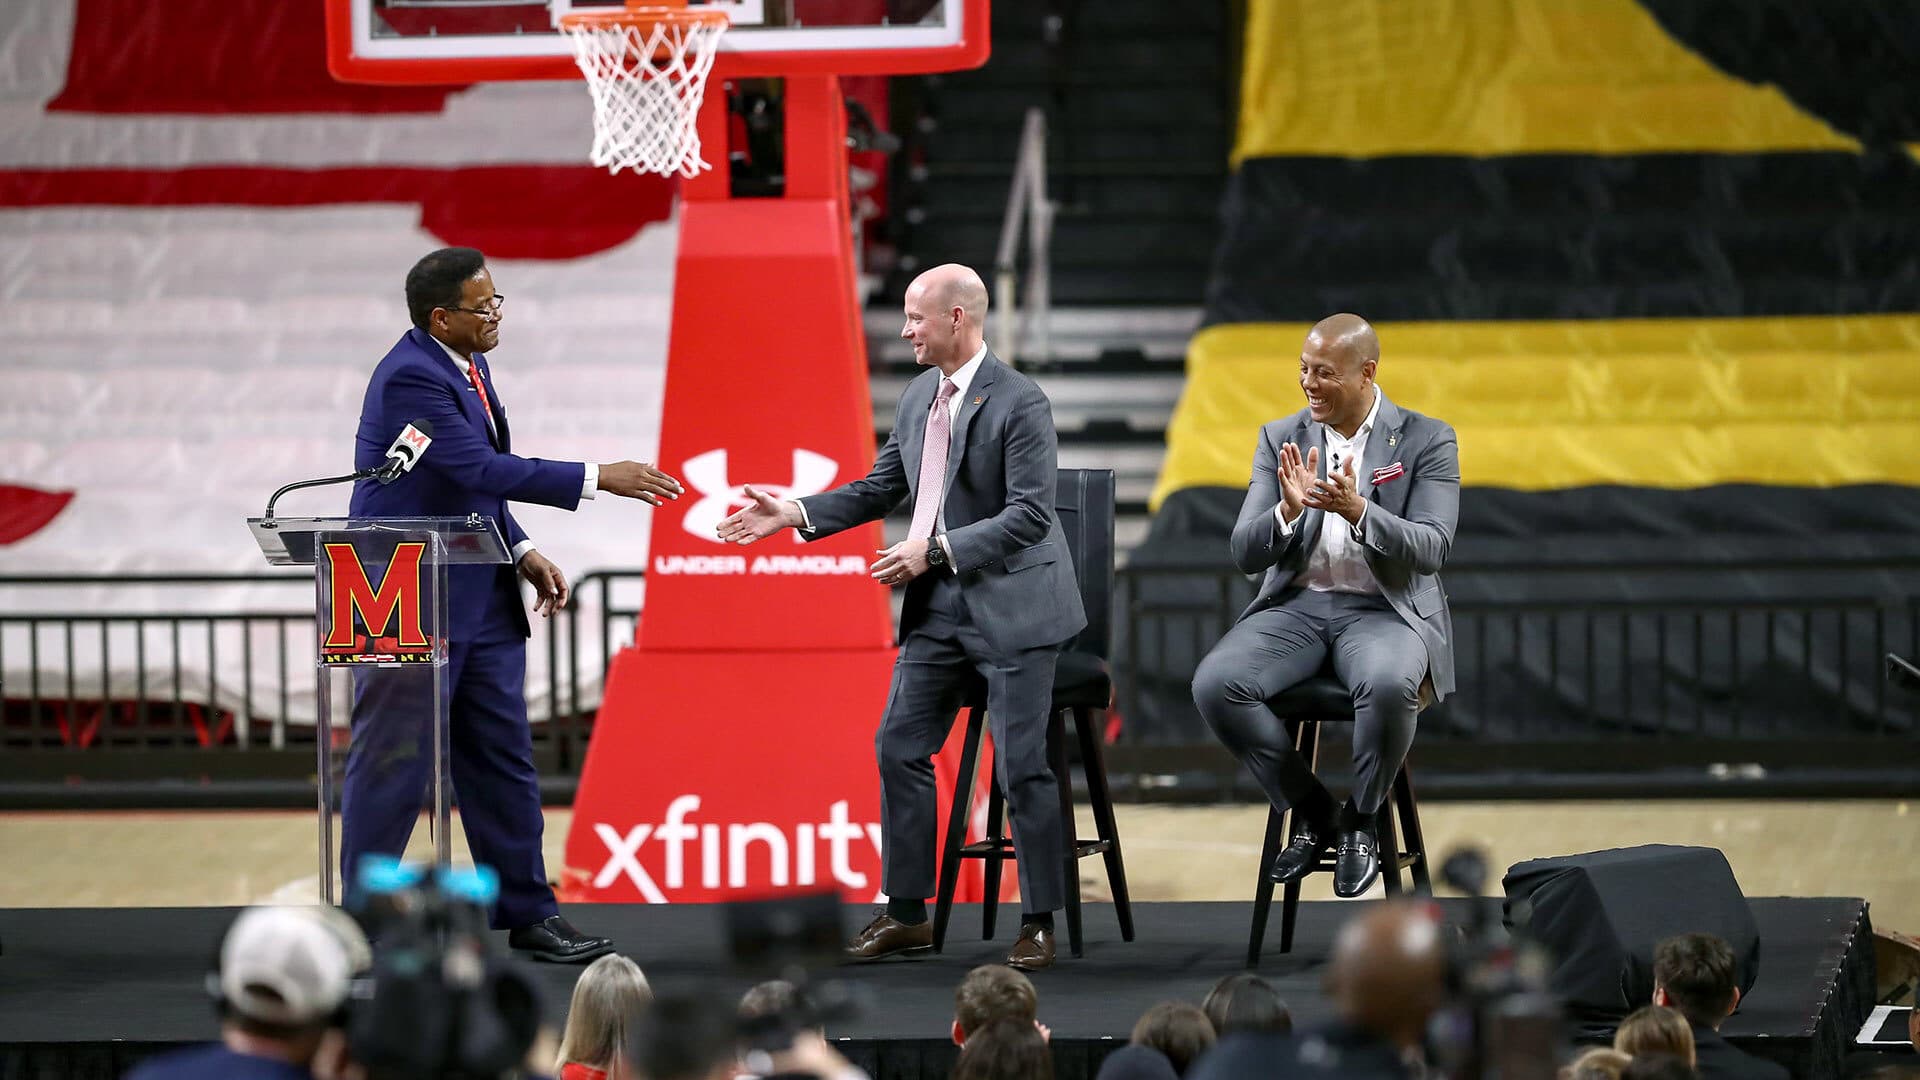 Kevin Willard shakes Darryll J. Pines' hand as Damon Evans claps during press conference